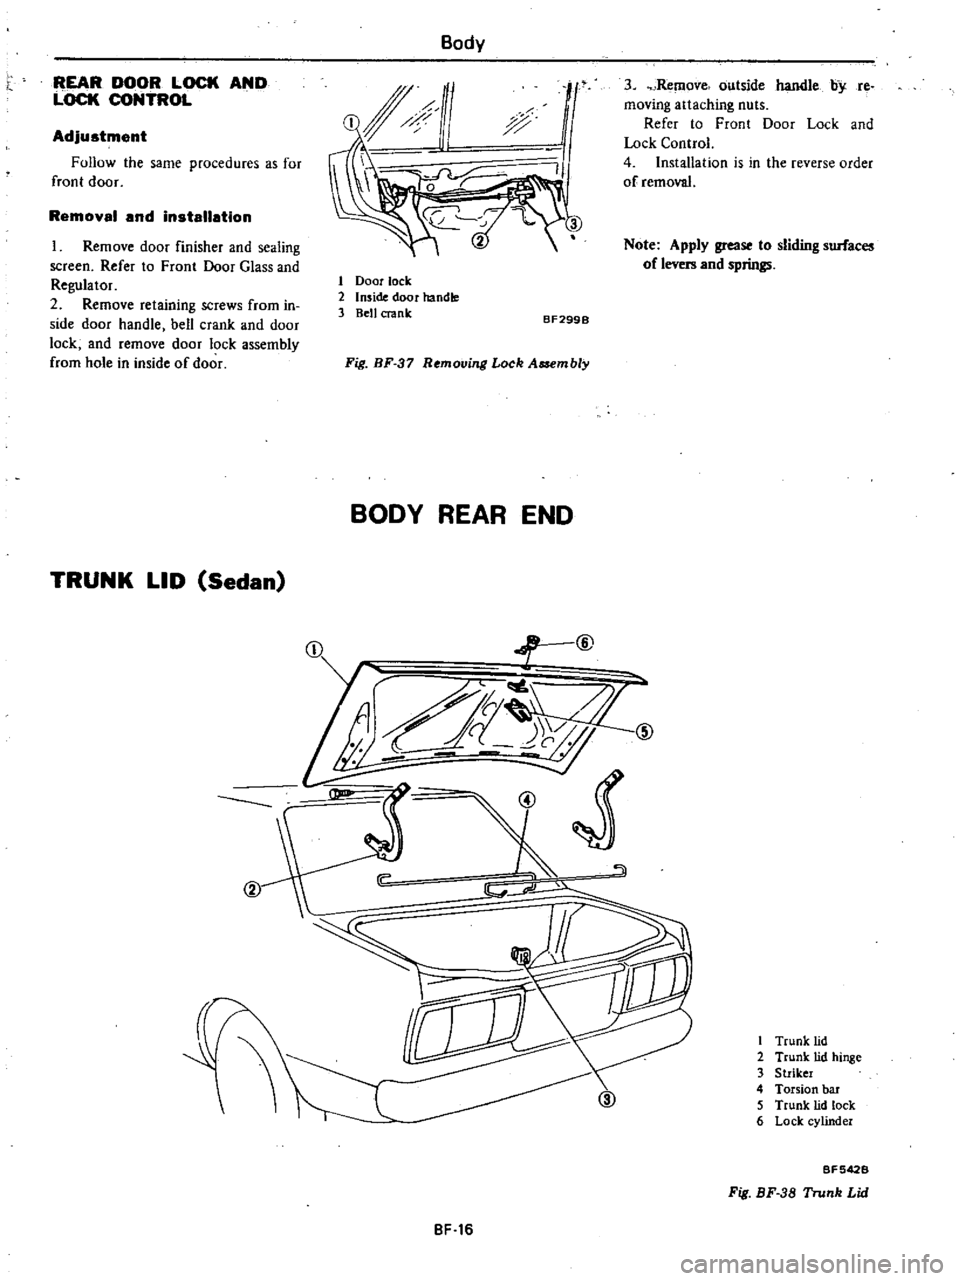 DATSUN 210 1979  Service Manual 
REAR 
DOOR 
LOCK

AND

LOCK 
CONTROL

Adjustment

Follow

the 
same

procedures 
as 
for

front

door

Removal 
and

installation

Remove

door 
finisher 
and

sealing

screen

Refer 
to 
Front

Door